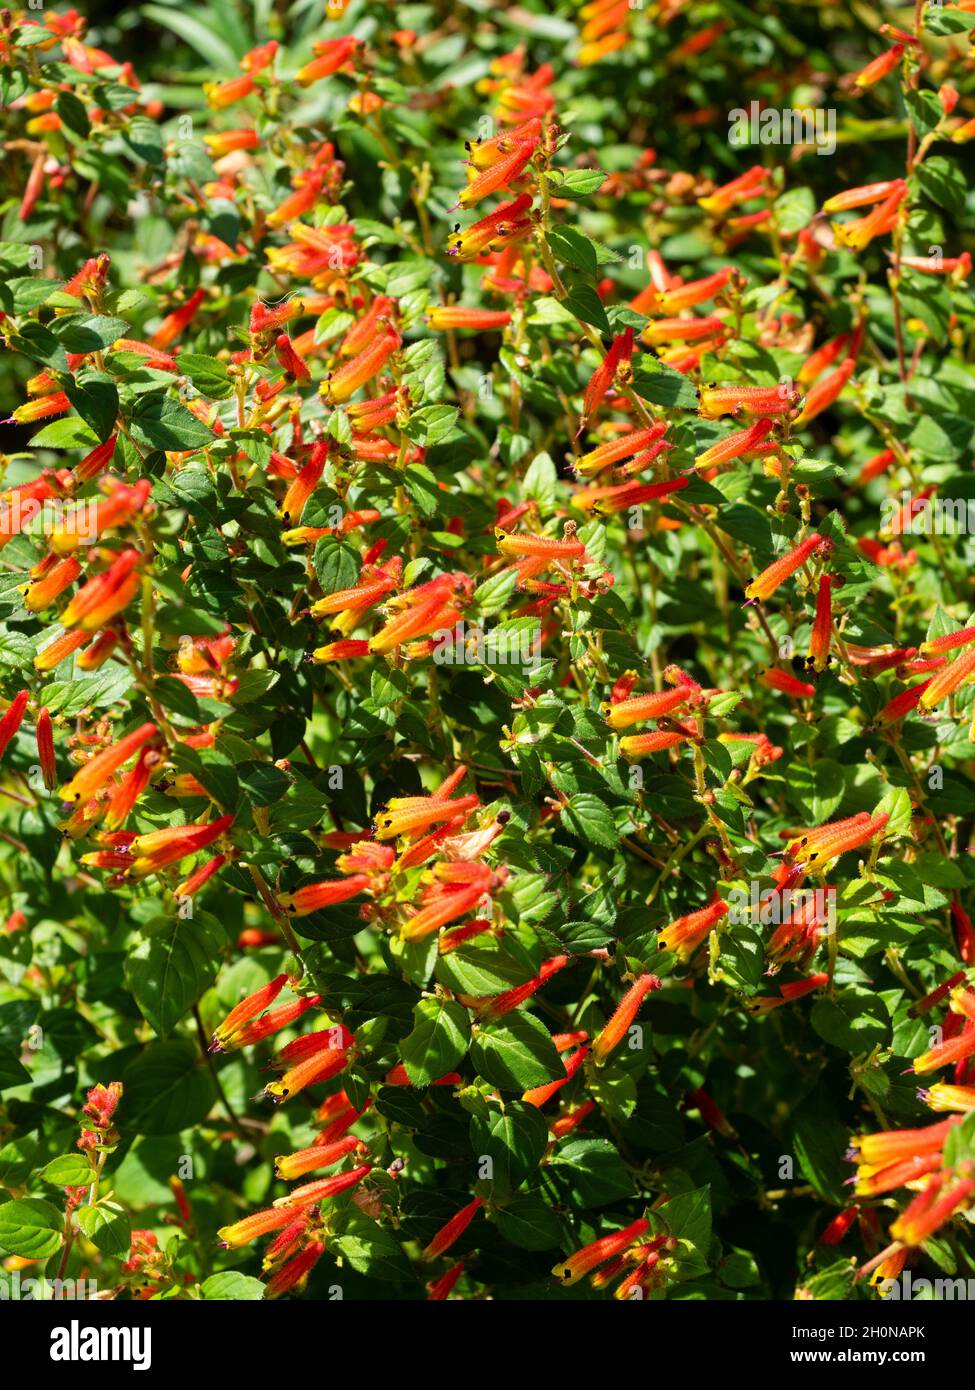 Massed display of the yellow tipped red flowers of the tender to half hardy shrubby evergreen cigar plant, Cuphea cyanea Stock Photo